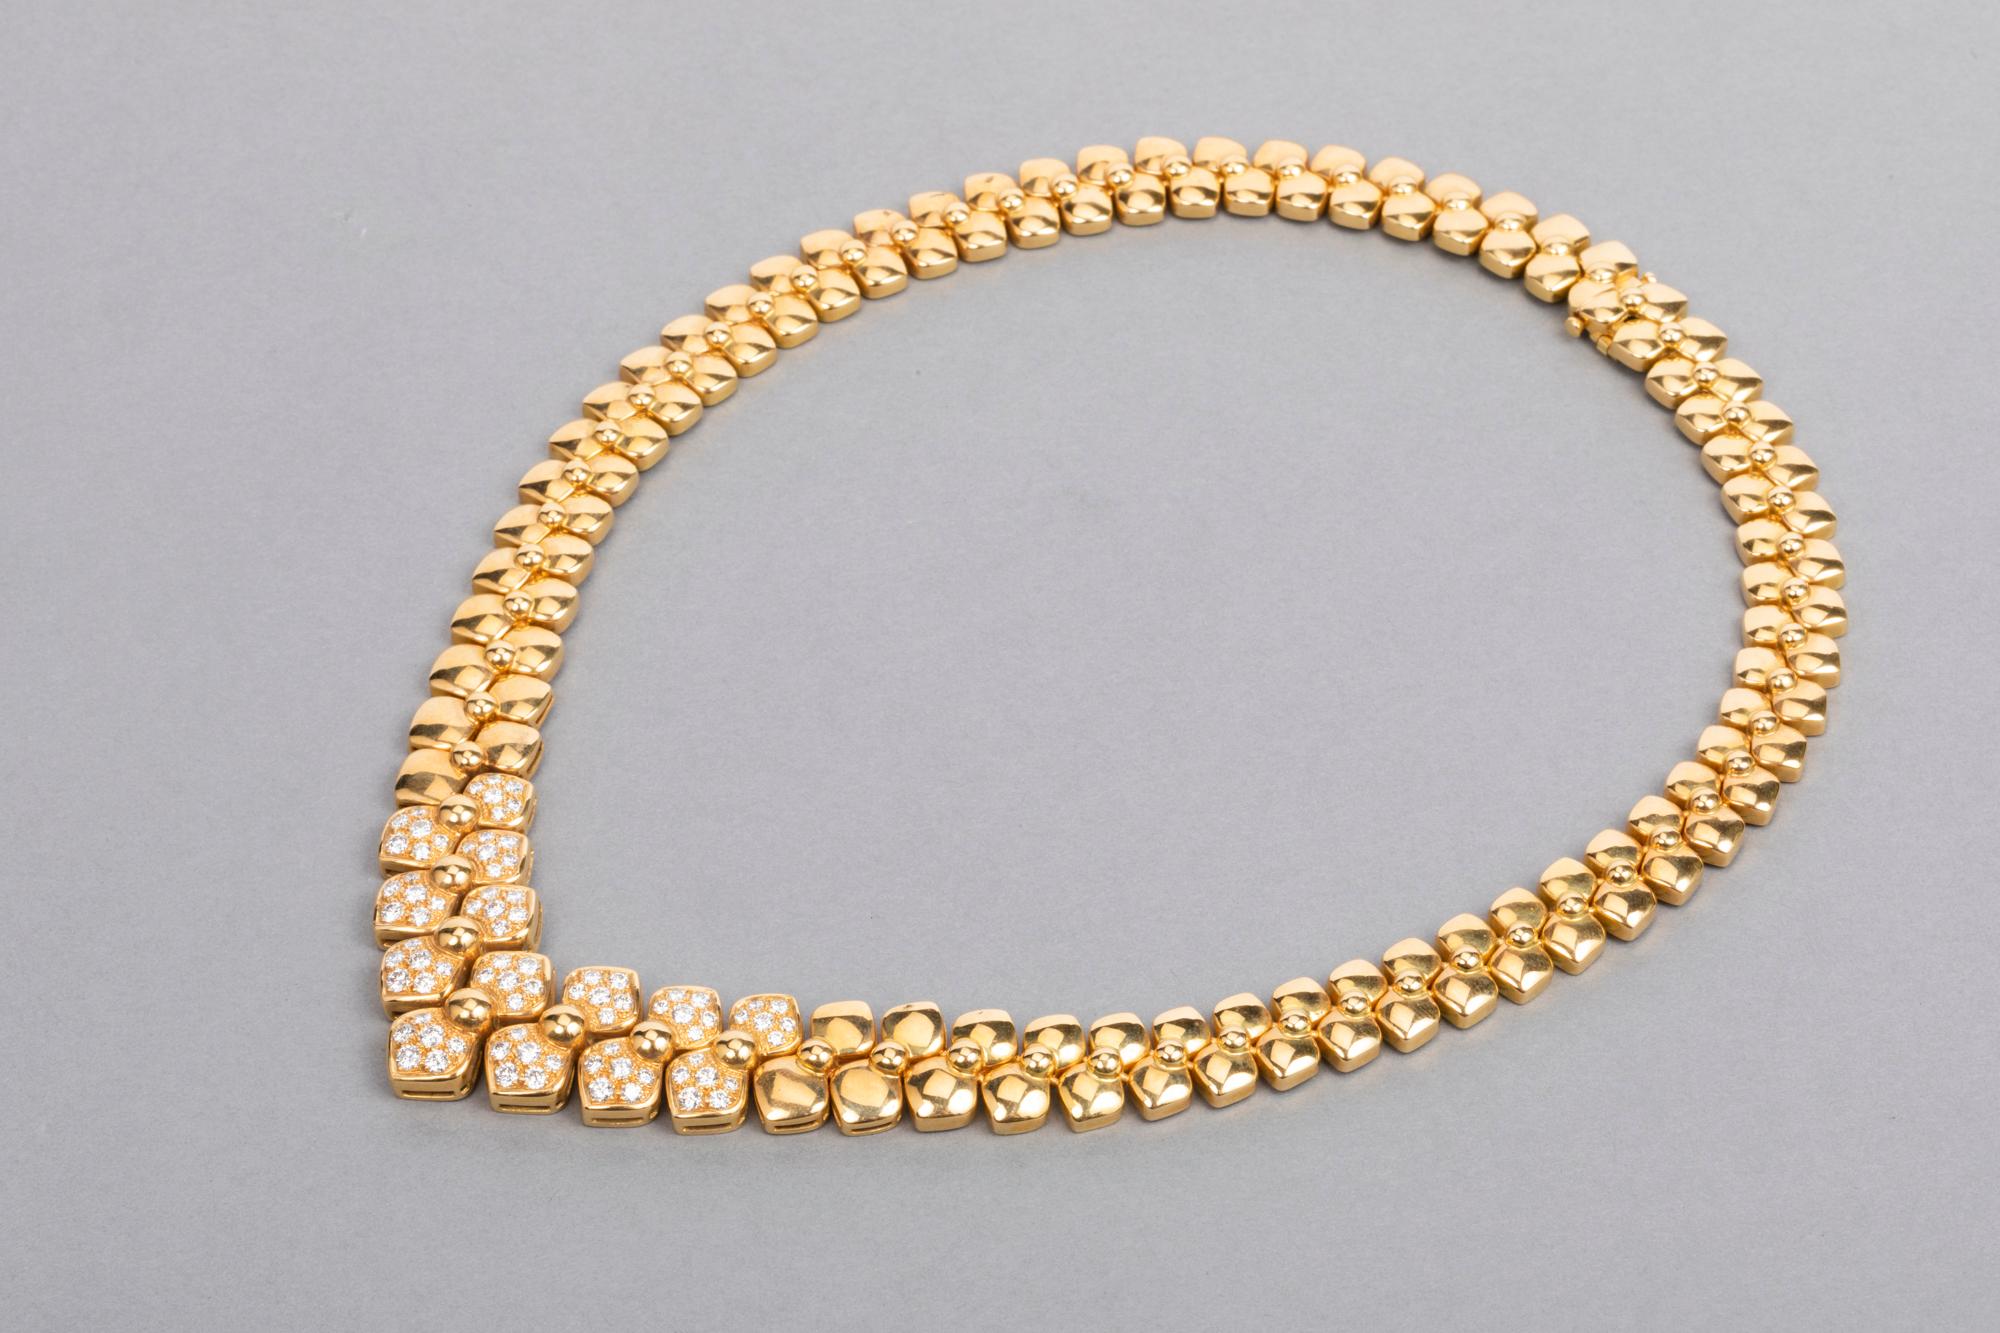 Van Cleef & Arpels Gold and Diamonds Fashion Necklace For Sale 1